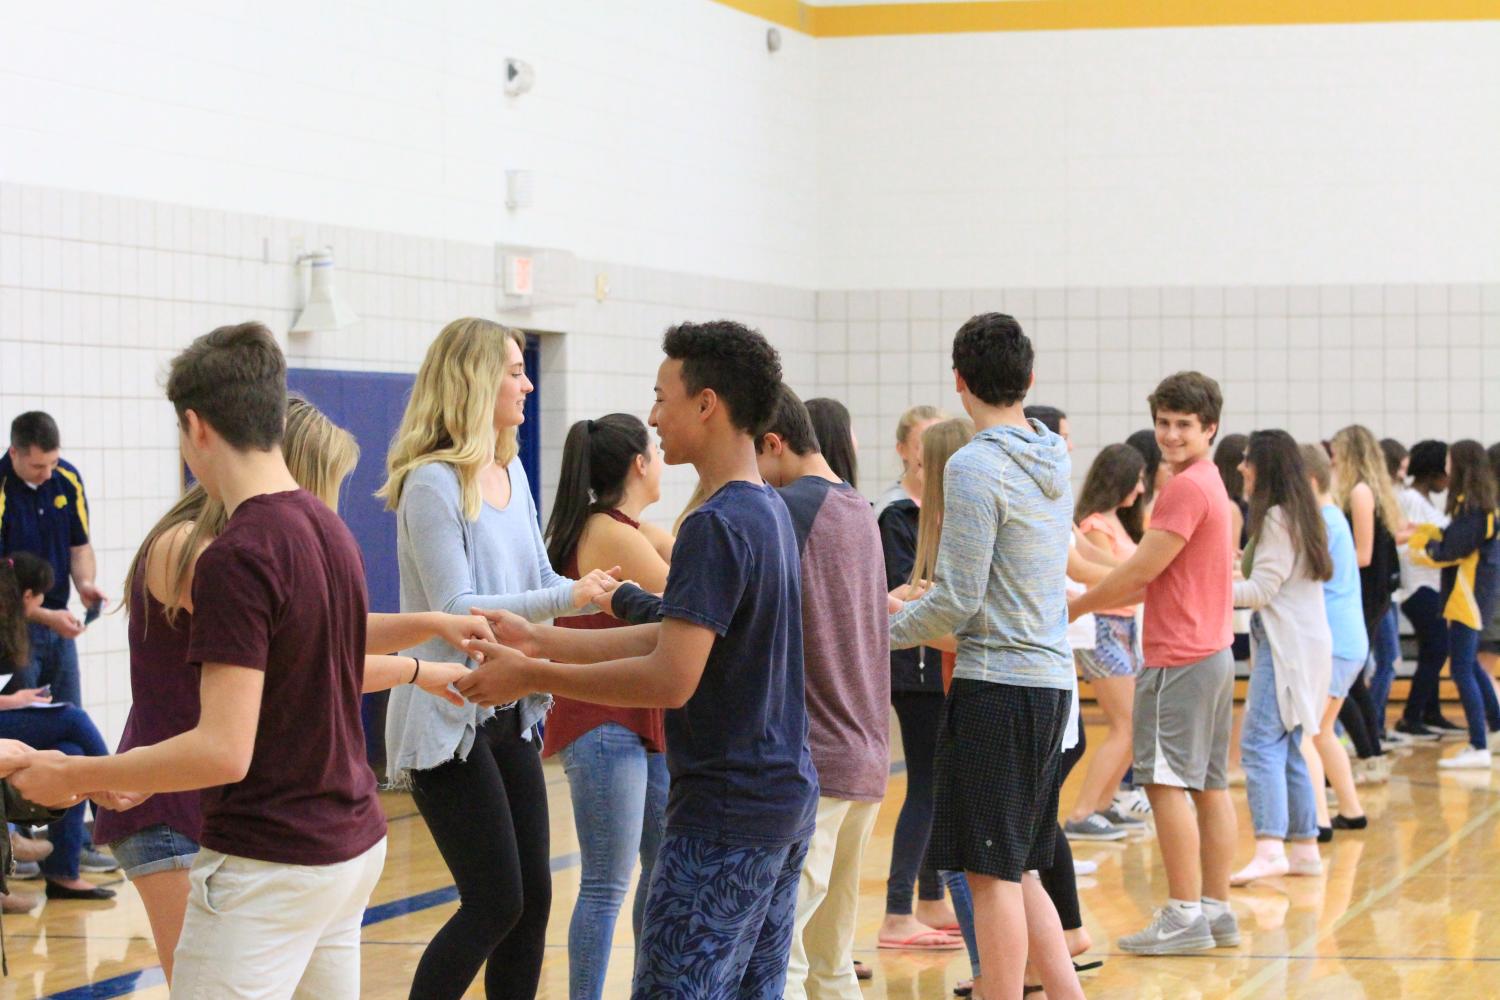 The Spanish program at South held their fourth annual salsa dancing lessons on May 19 in South’s Boll Center. 